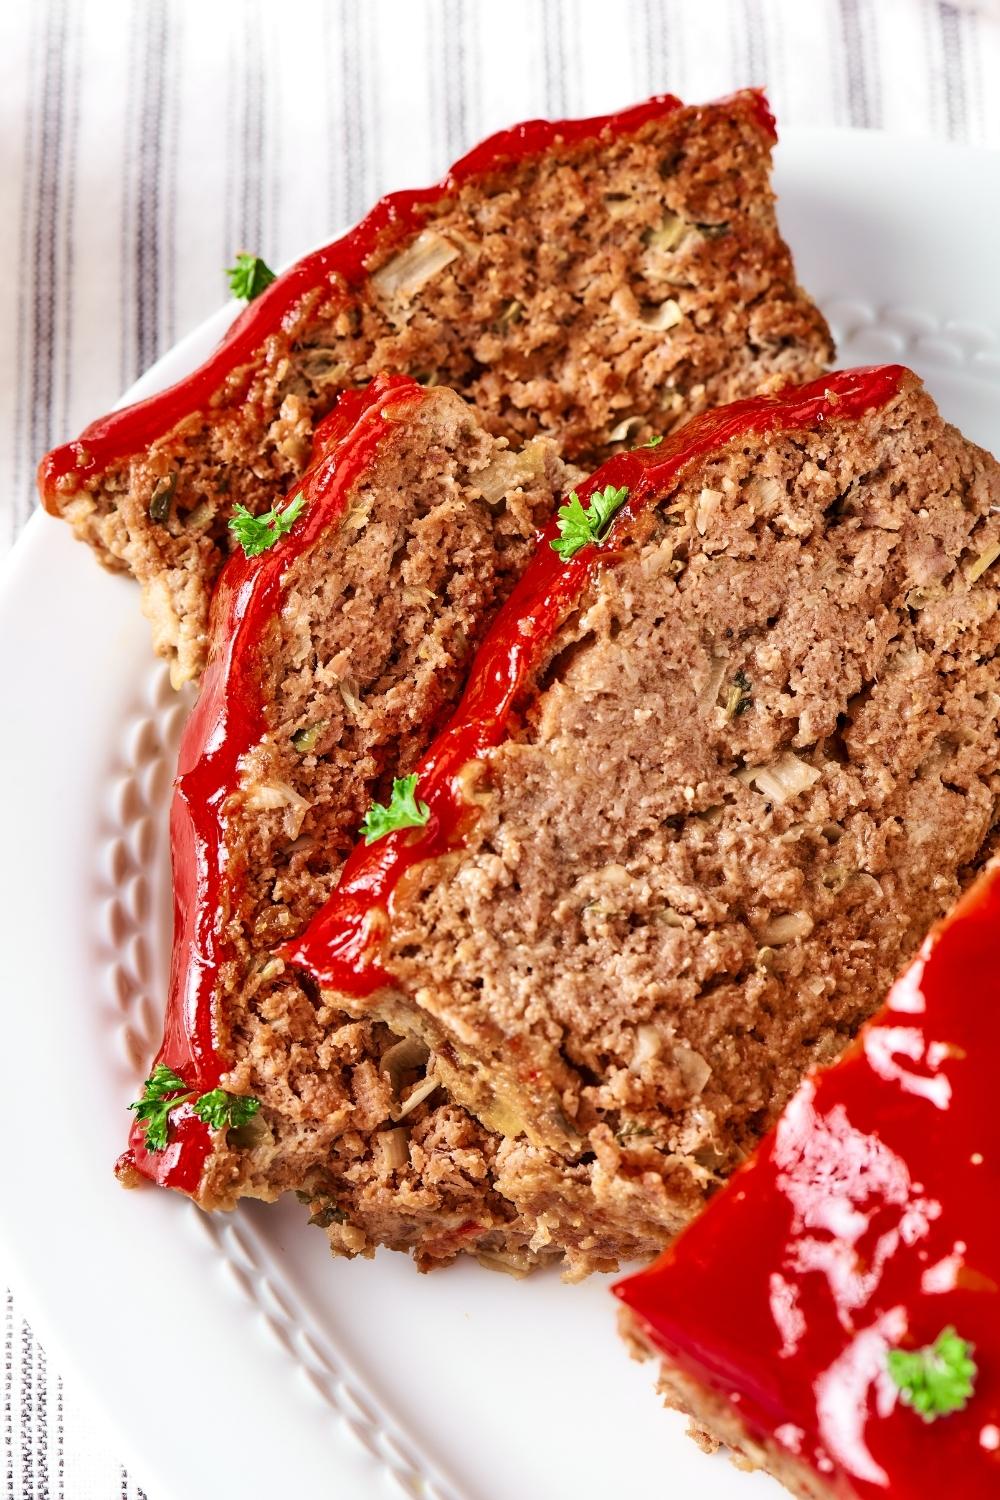 Three slices of meatloaf overlapping one another on a white plate.